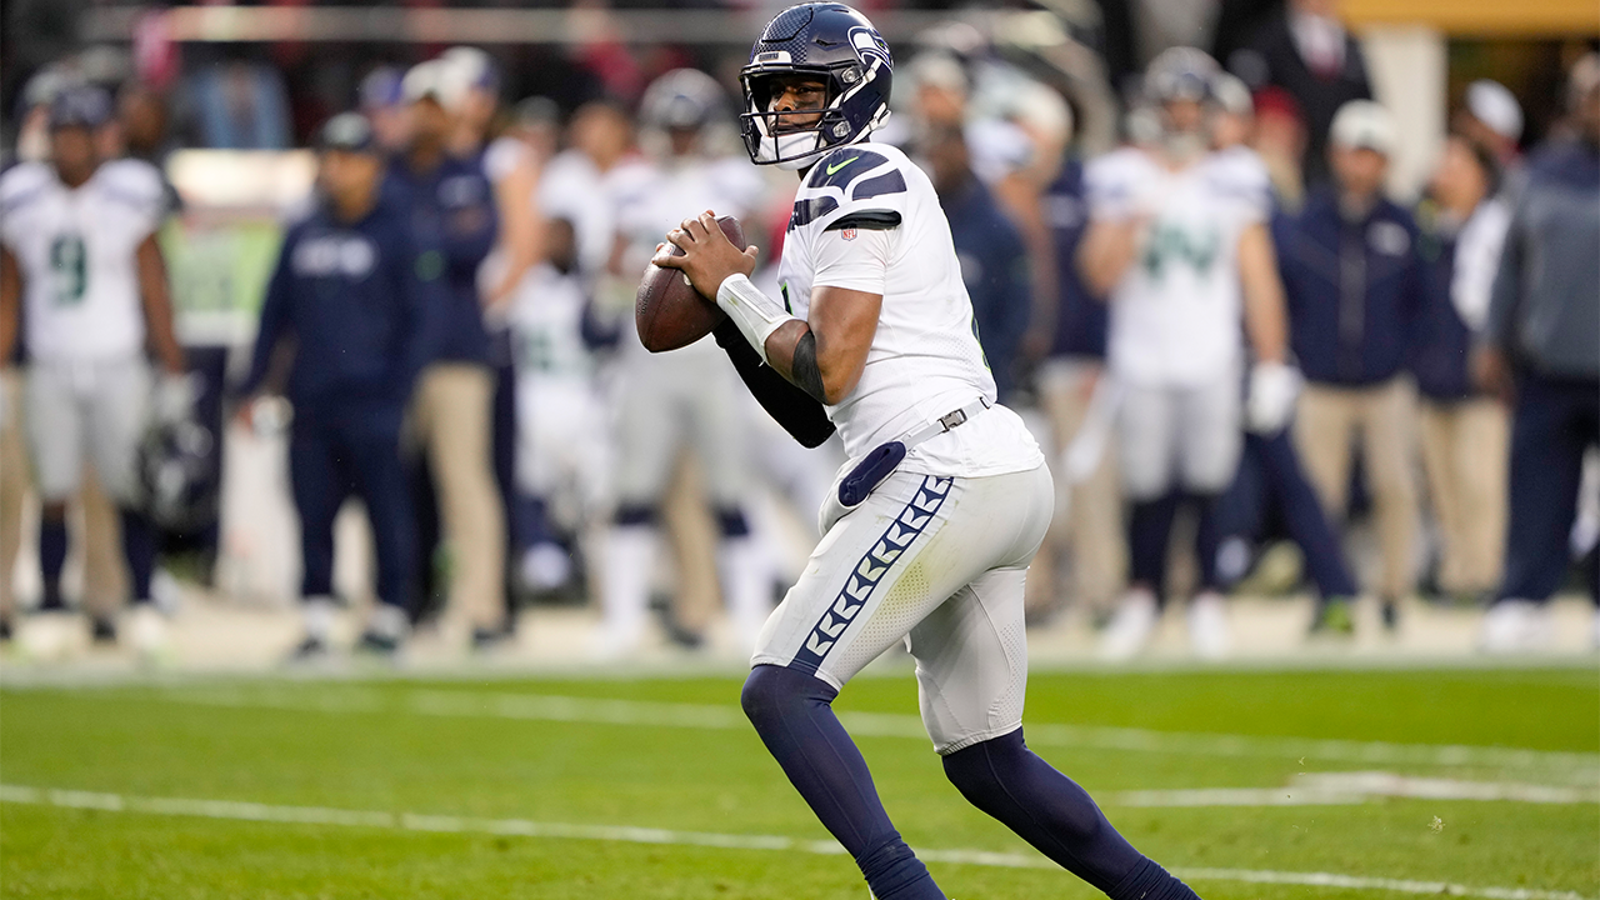 Seahawks QB Geno Smith wins 'NFL on FOX' Comeback Player of the Year